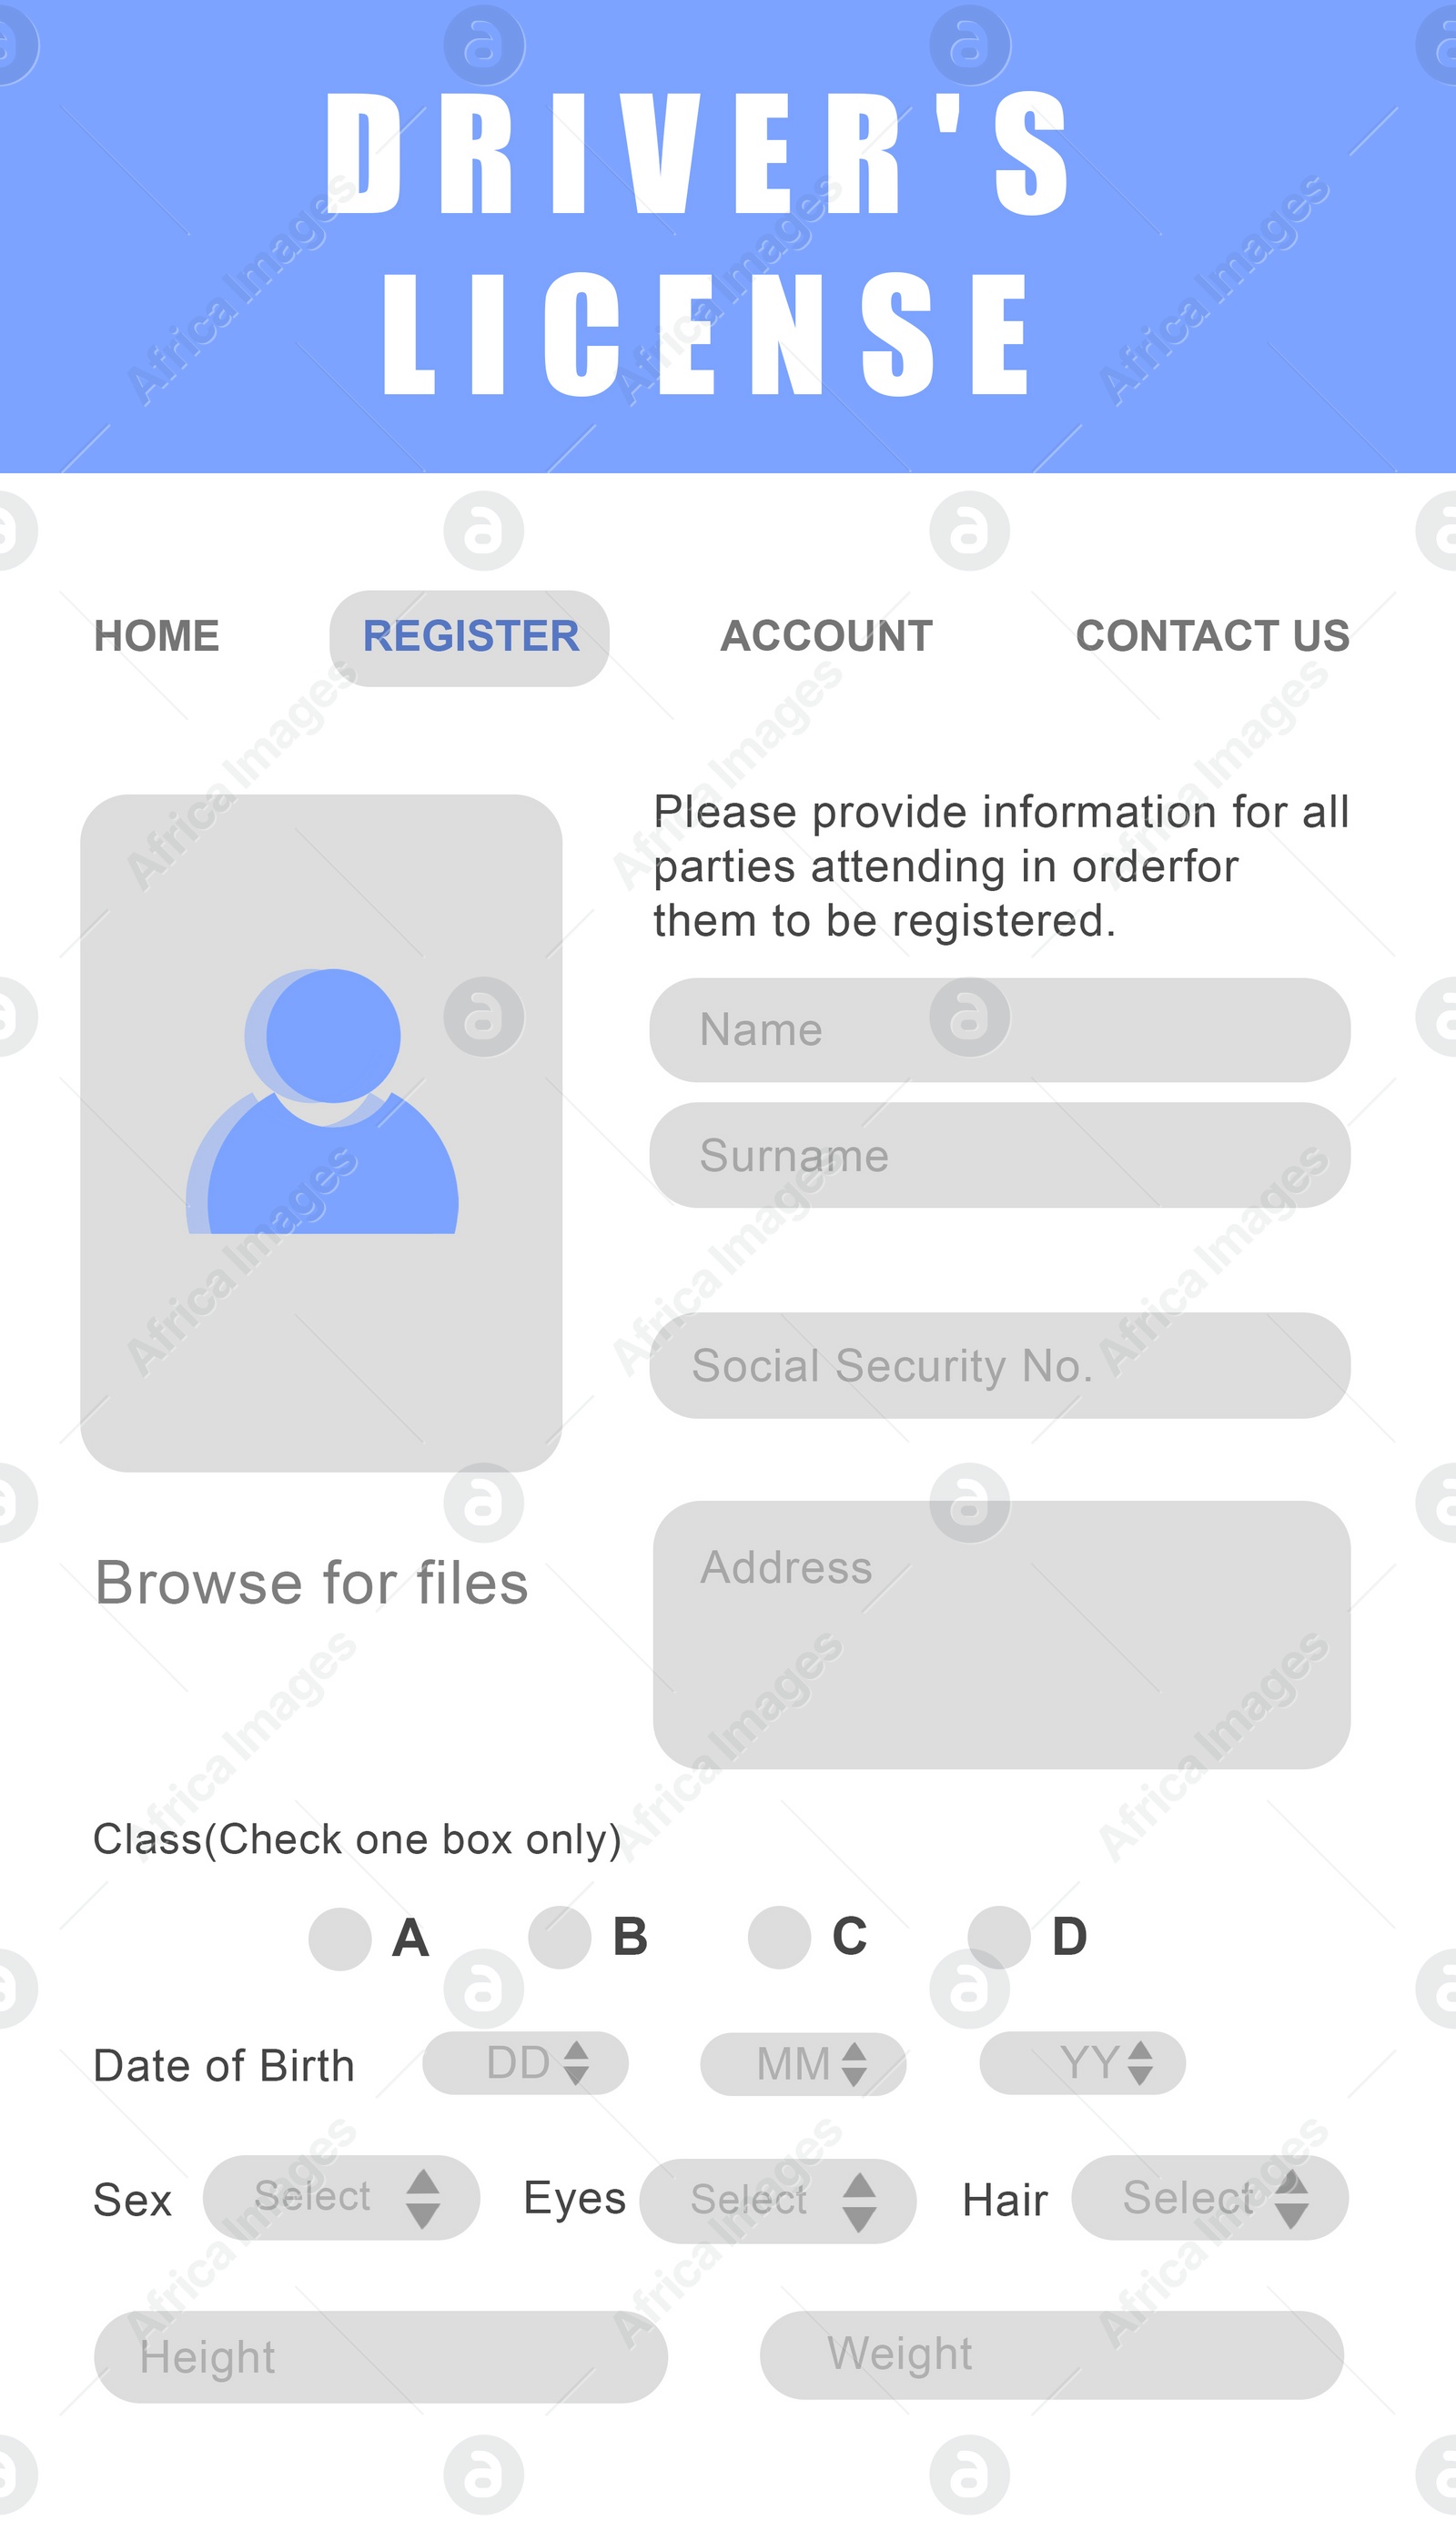 Image of Website page with Driver's license application form